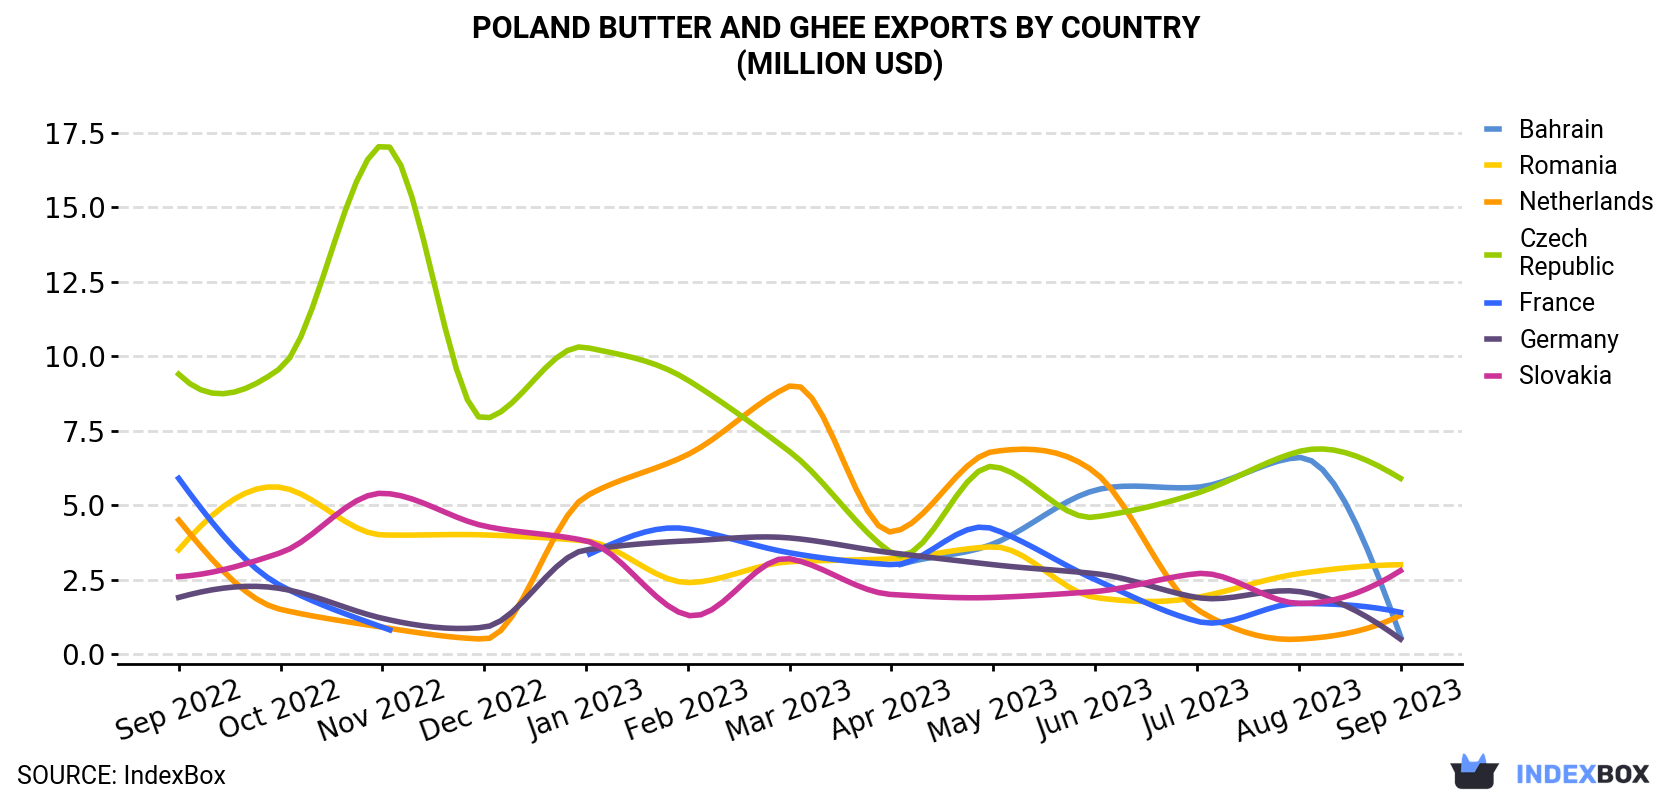 Poland Butter And Ghee Exports By Country (Million USD)